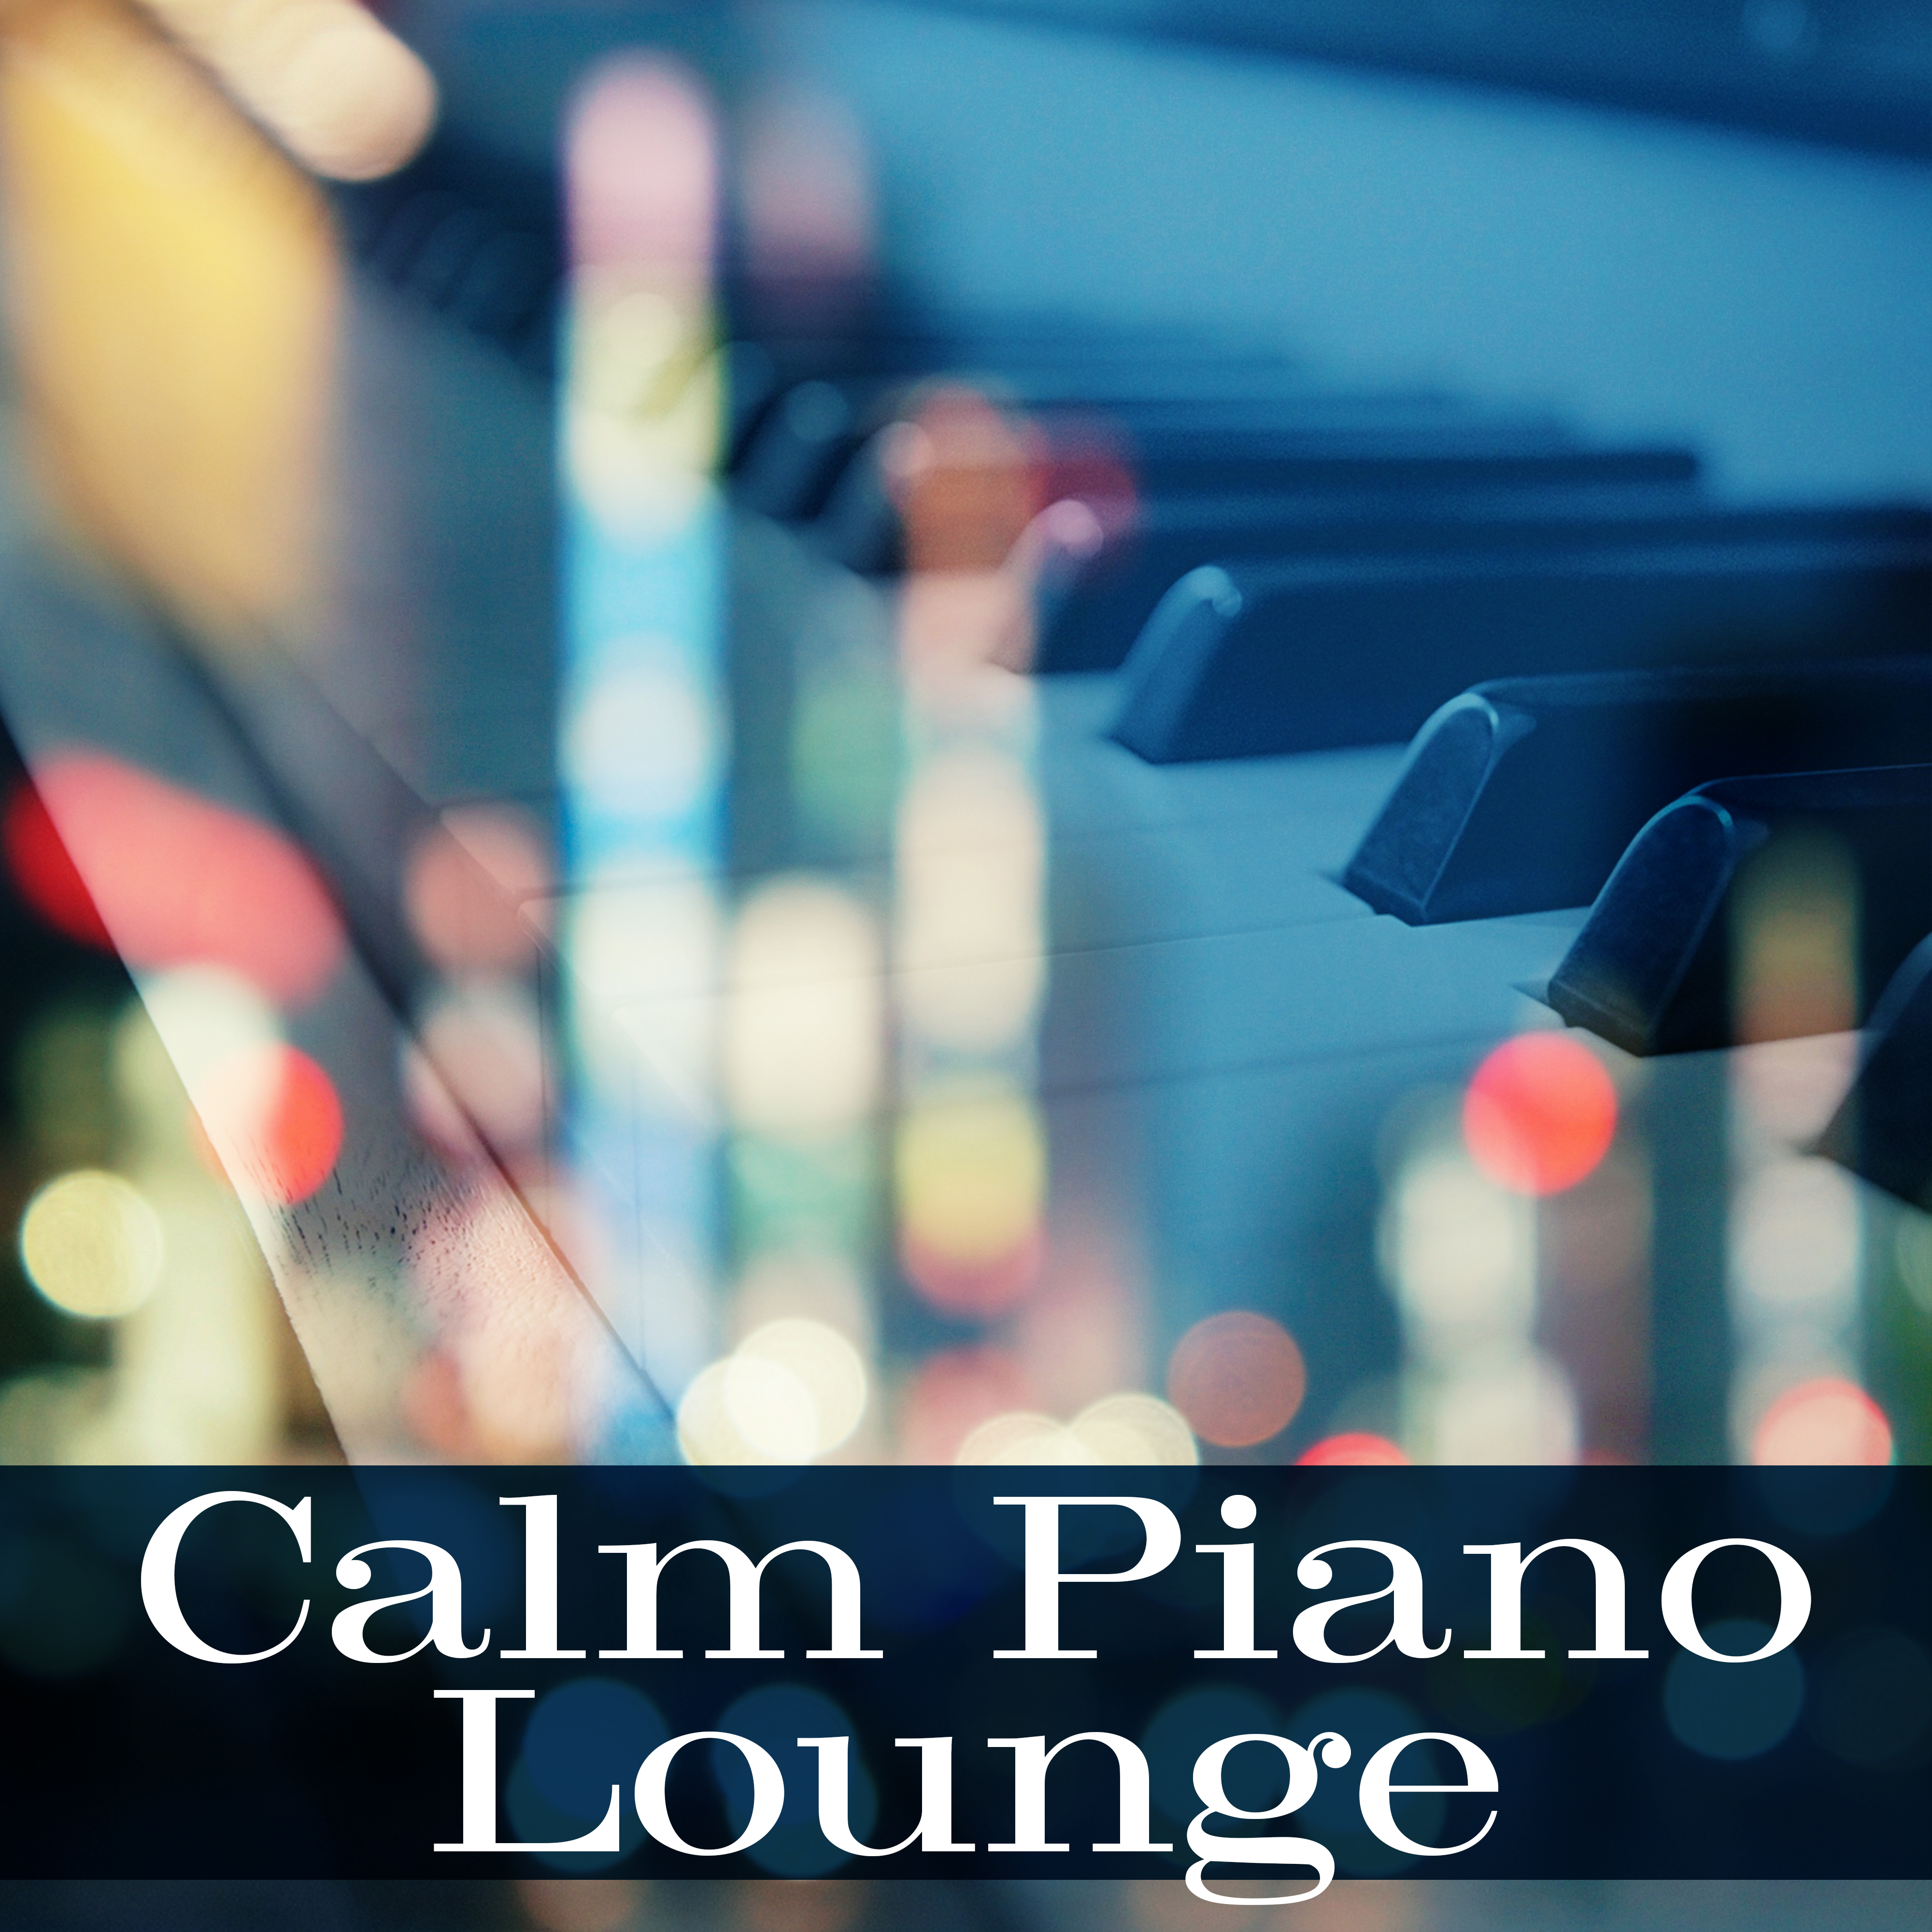 Calm Piano Lounge – Jazz Instrumental Ambient Music, Mellow Jazz Sounds, Relaxed Piano